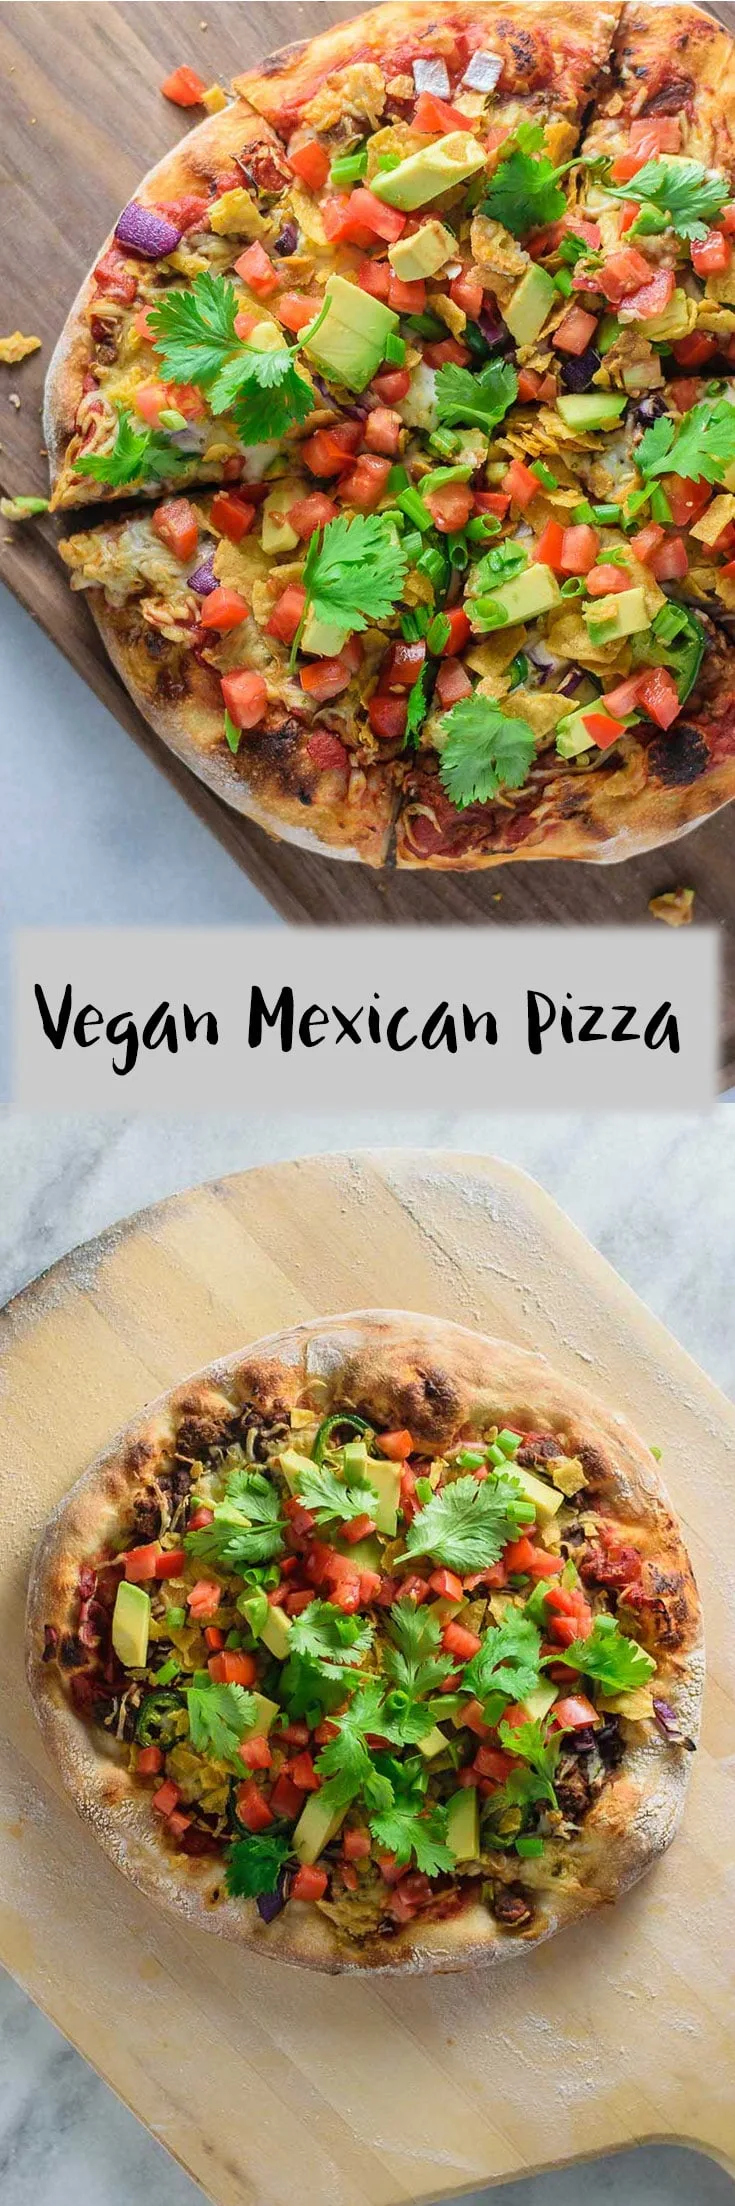 Pizza dough is piled high with taco-inspired toppings including refried beans, roasted jalapeño cheese, crushed tortilla chips, & more in this vegan Mexican pizza. | thecuriouschickpea.com